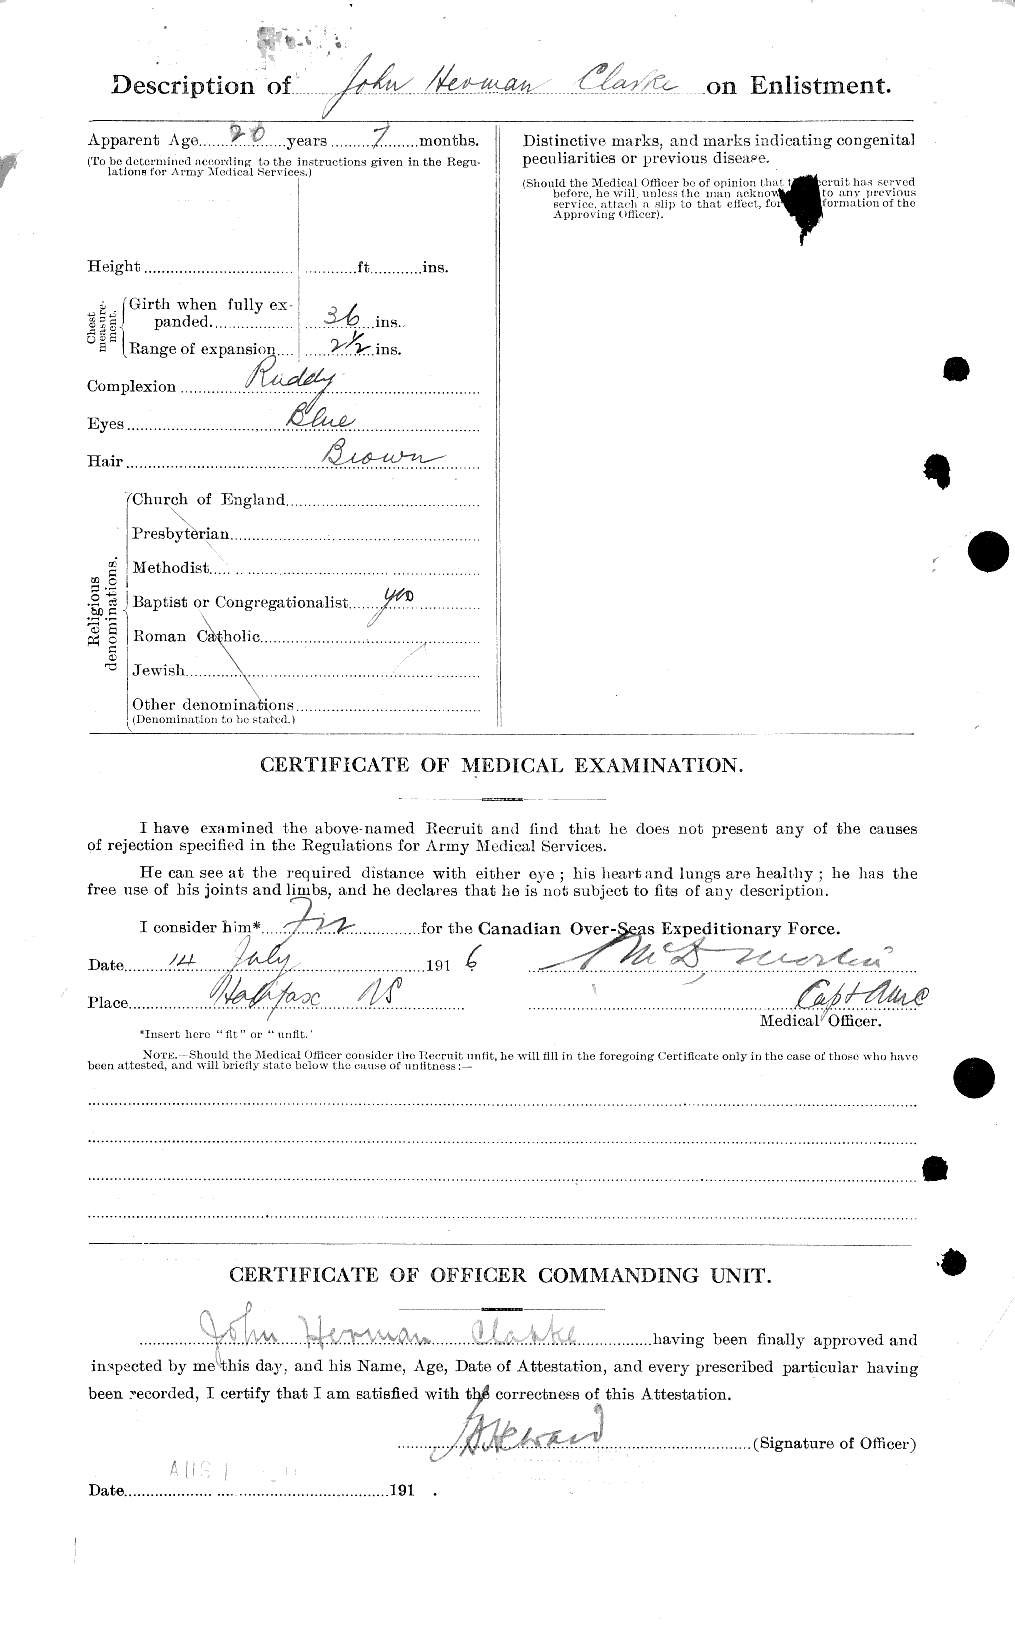 Personnel Records of the First World War - CEF 024618b